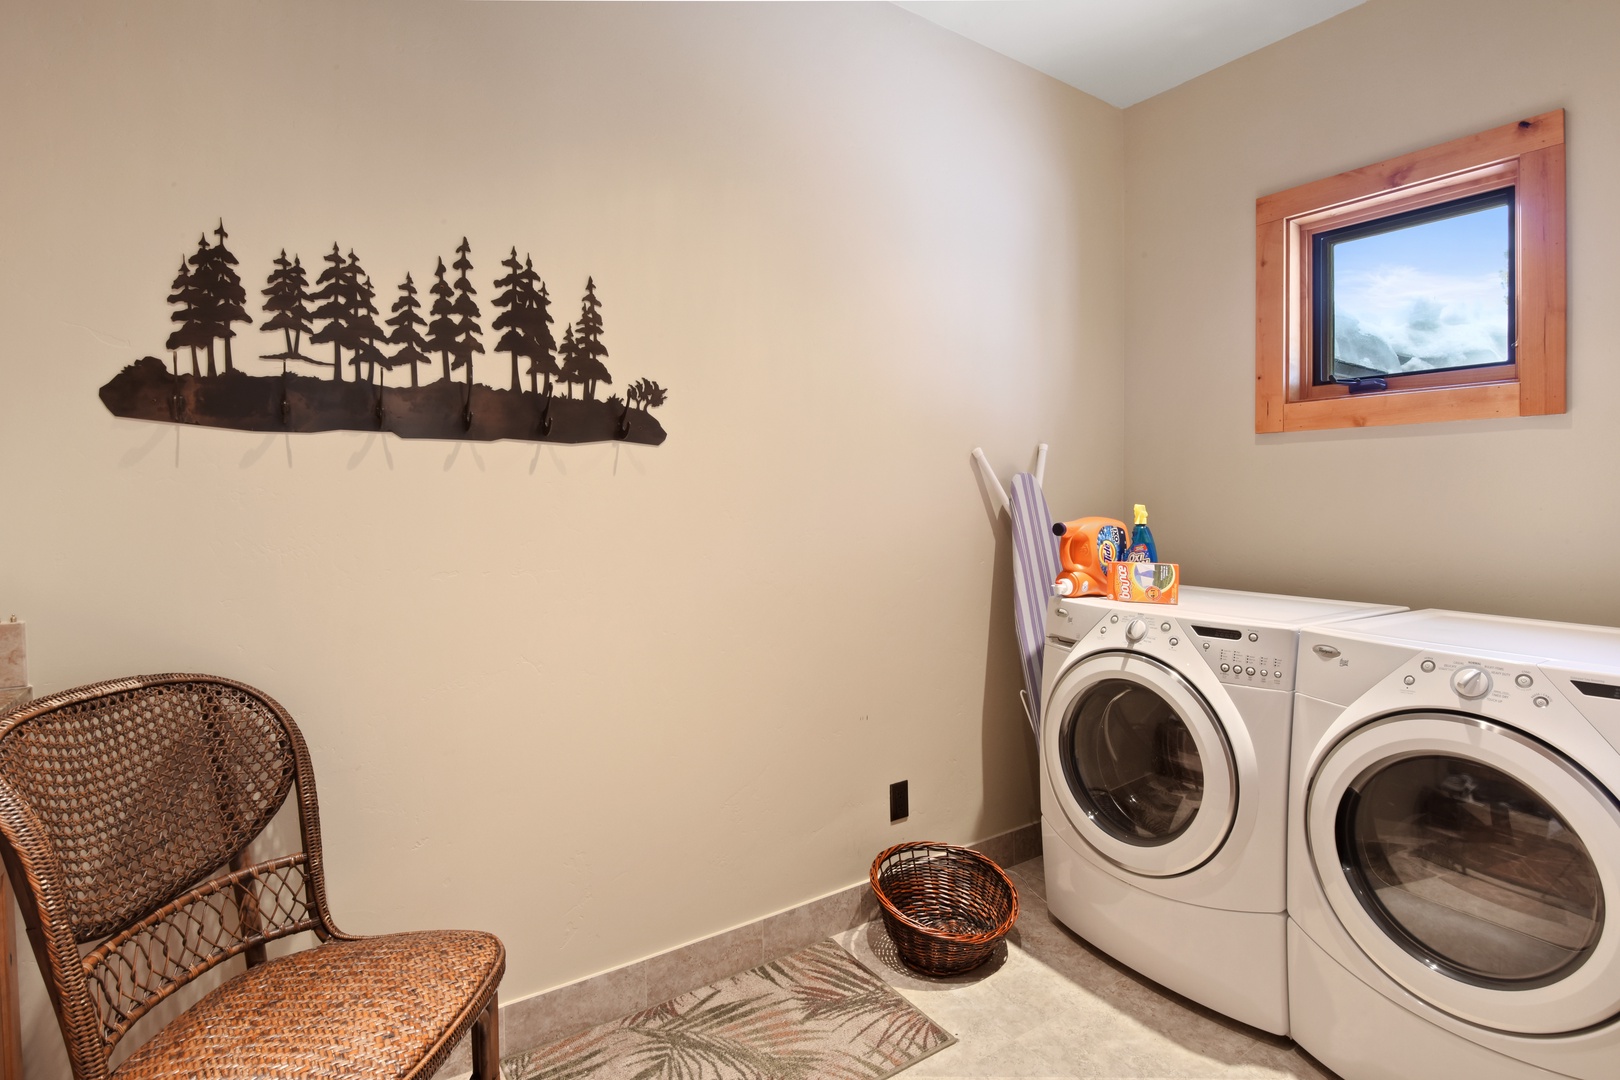 Laundry room w/ washer and dryer